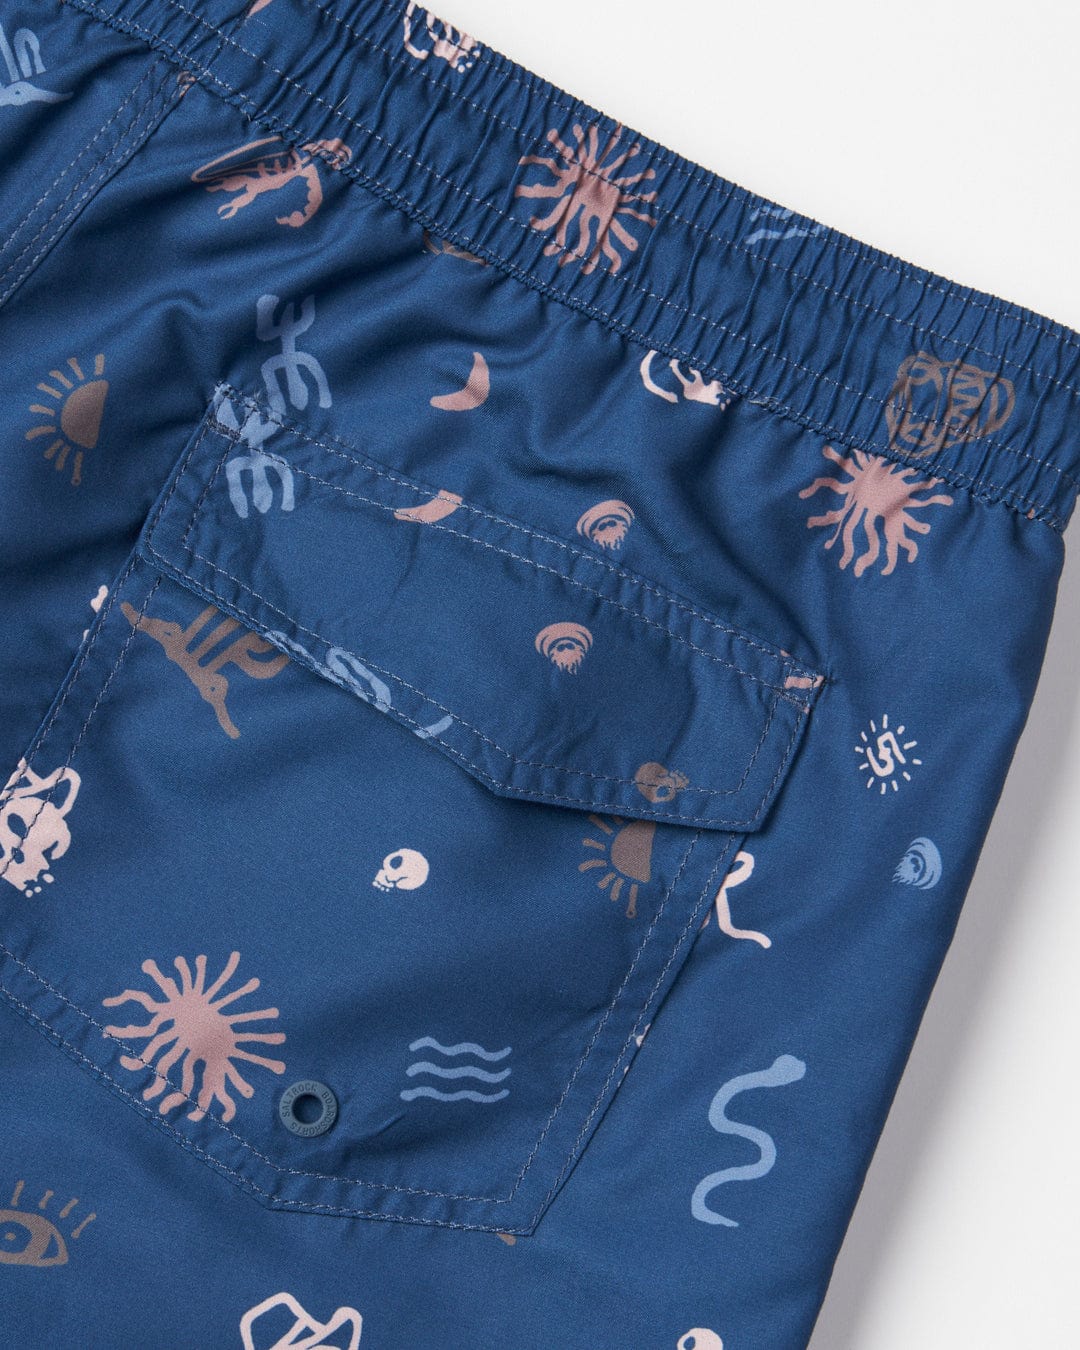 Saltrock Last Stop - Mens Swimshorts - Blue featuring an all-over print of various white sea creatures, with a visible pocket and elasticated waist.